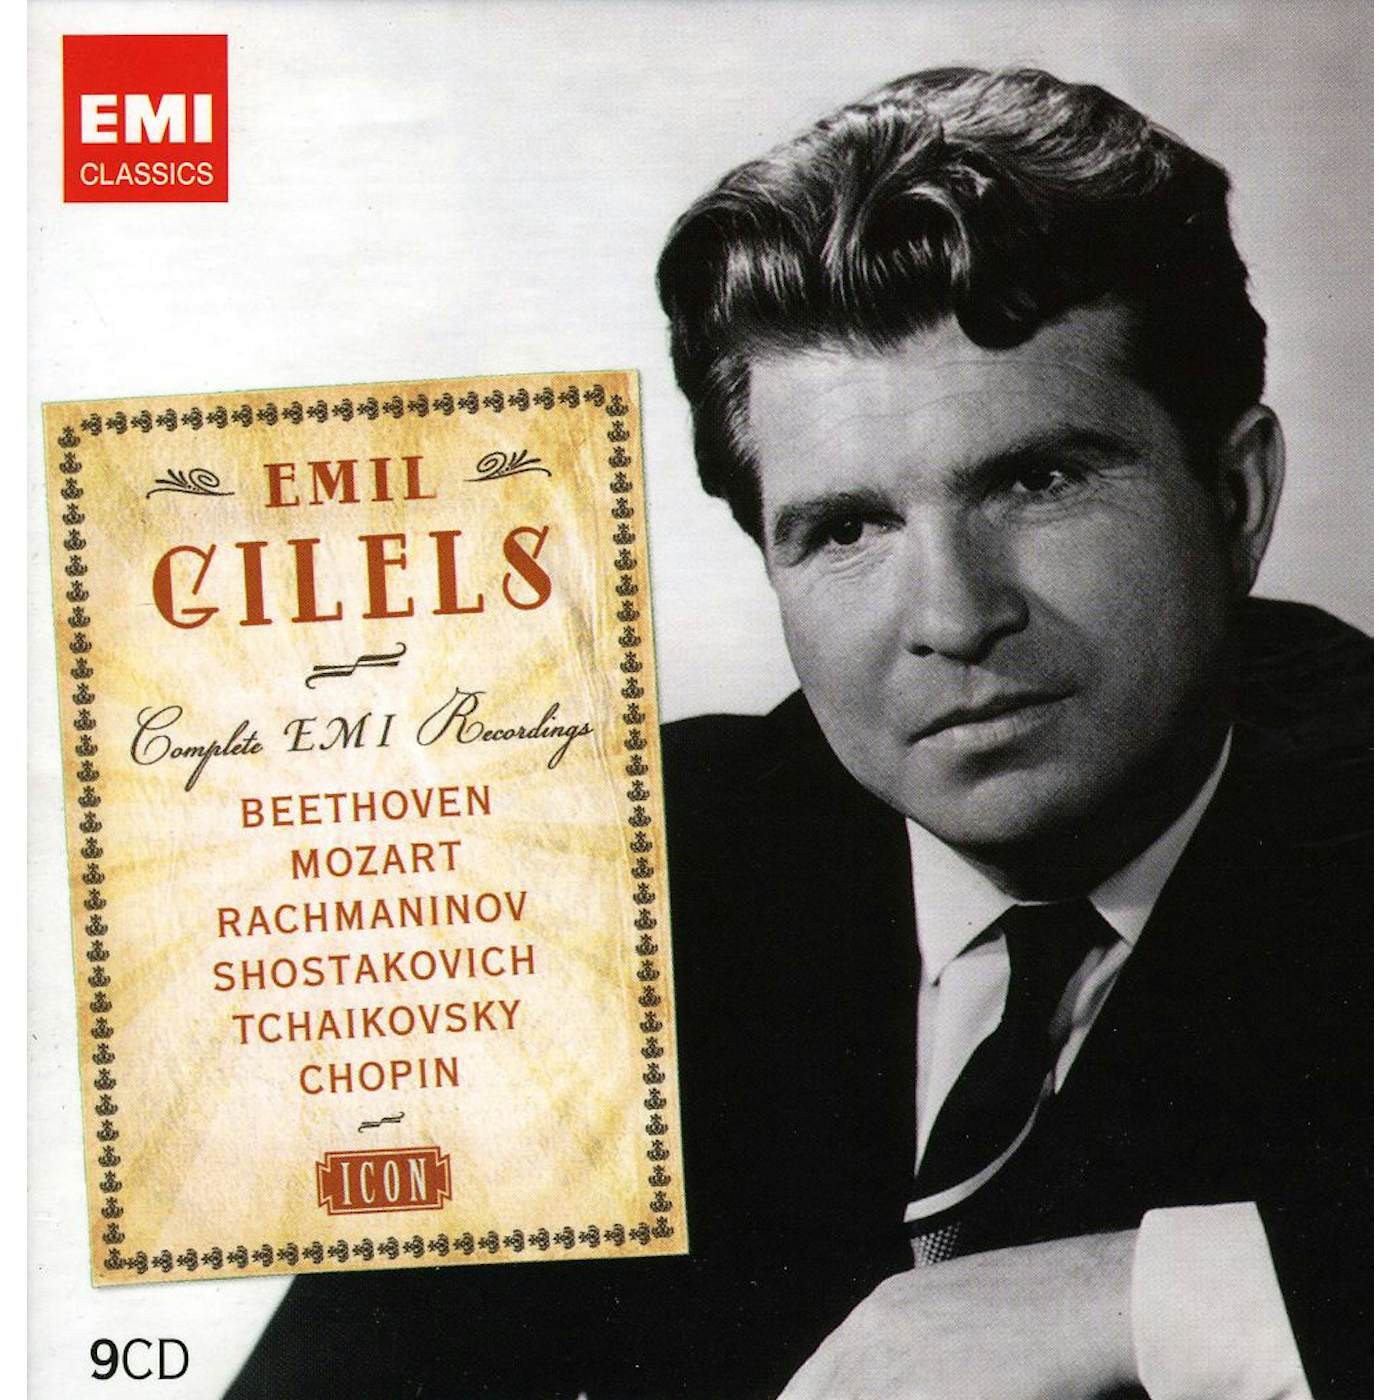 Emil Gilels ICON CD